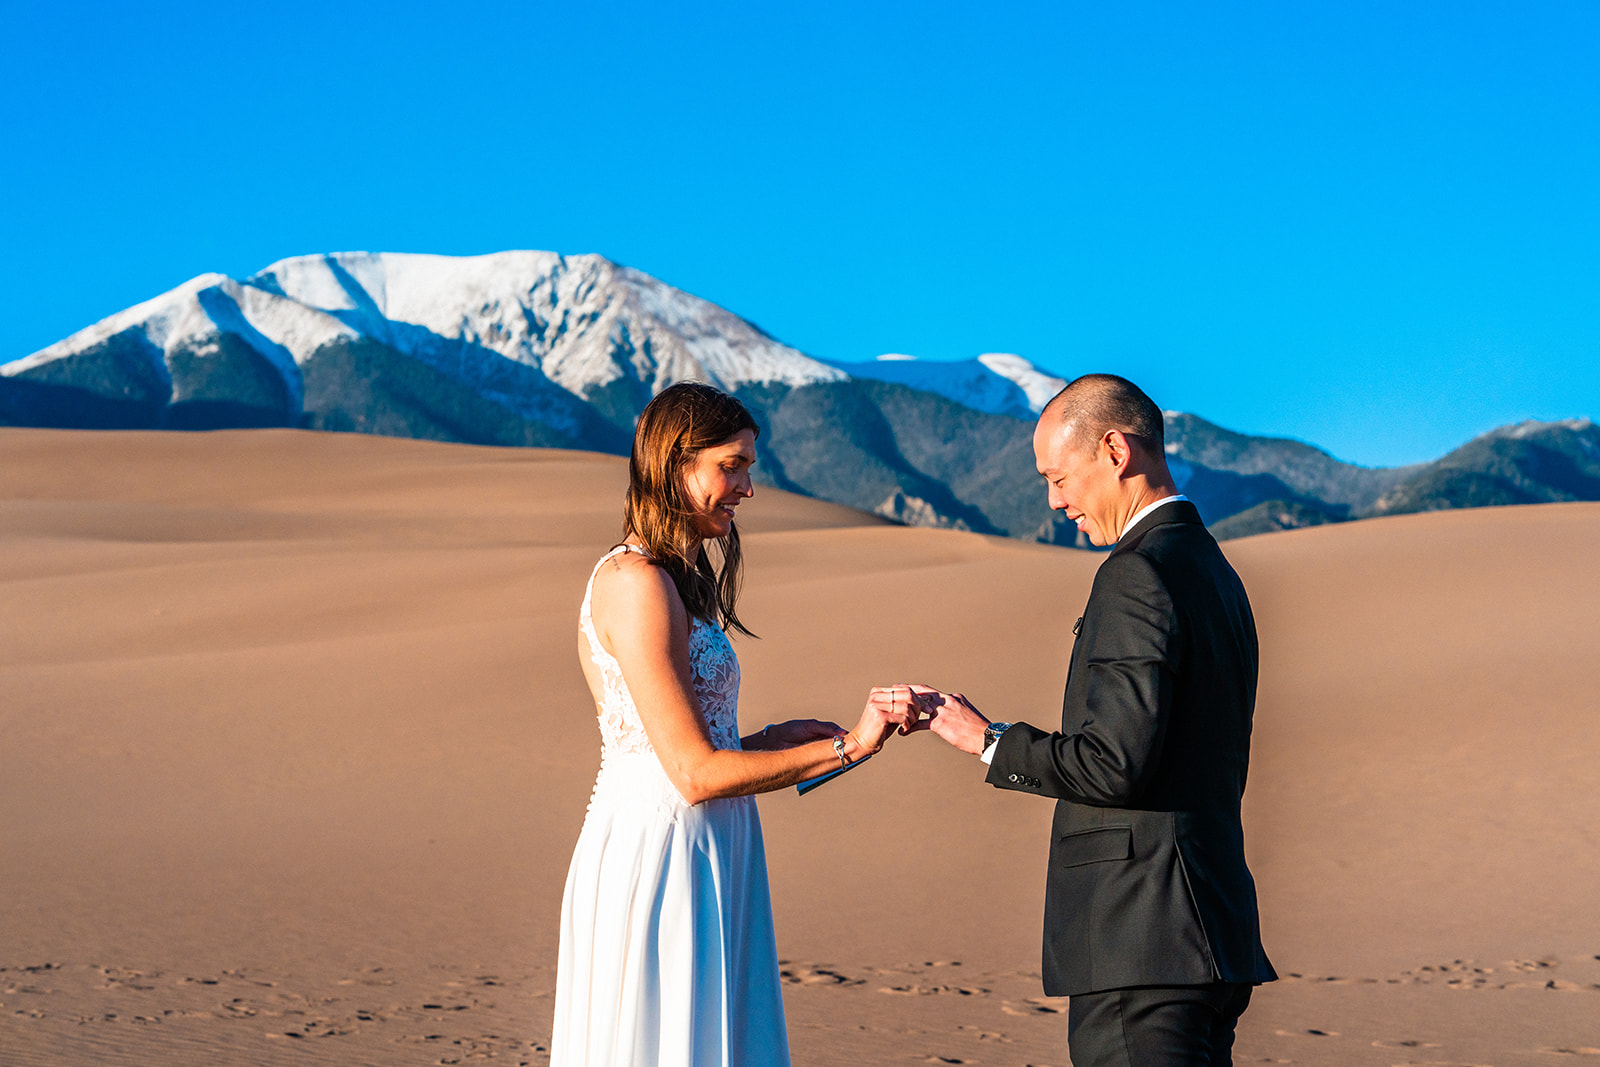 Bride and groom exchanging vows and rings during their Great sand dunes elopement.